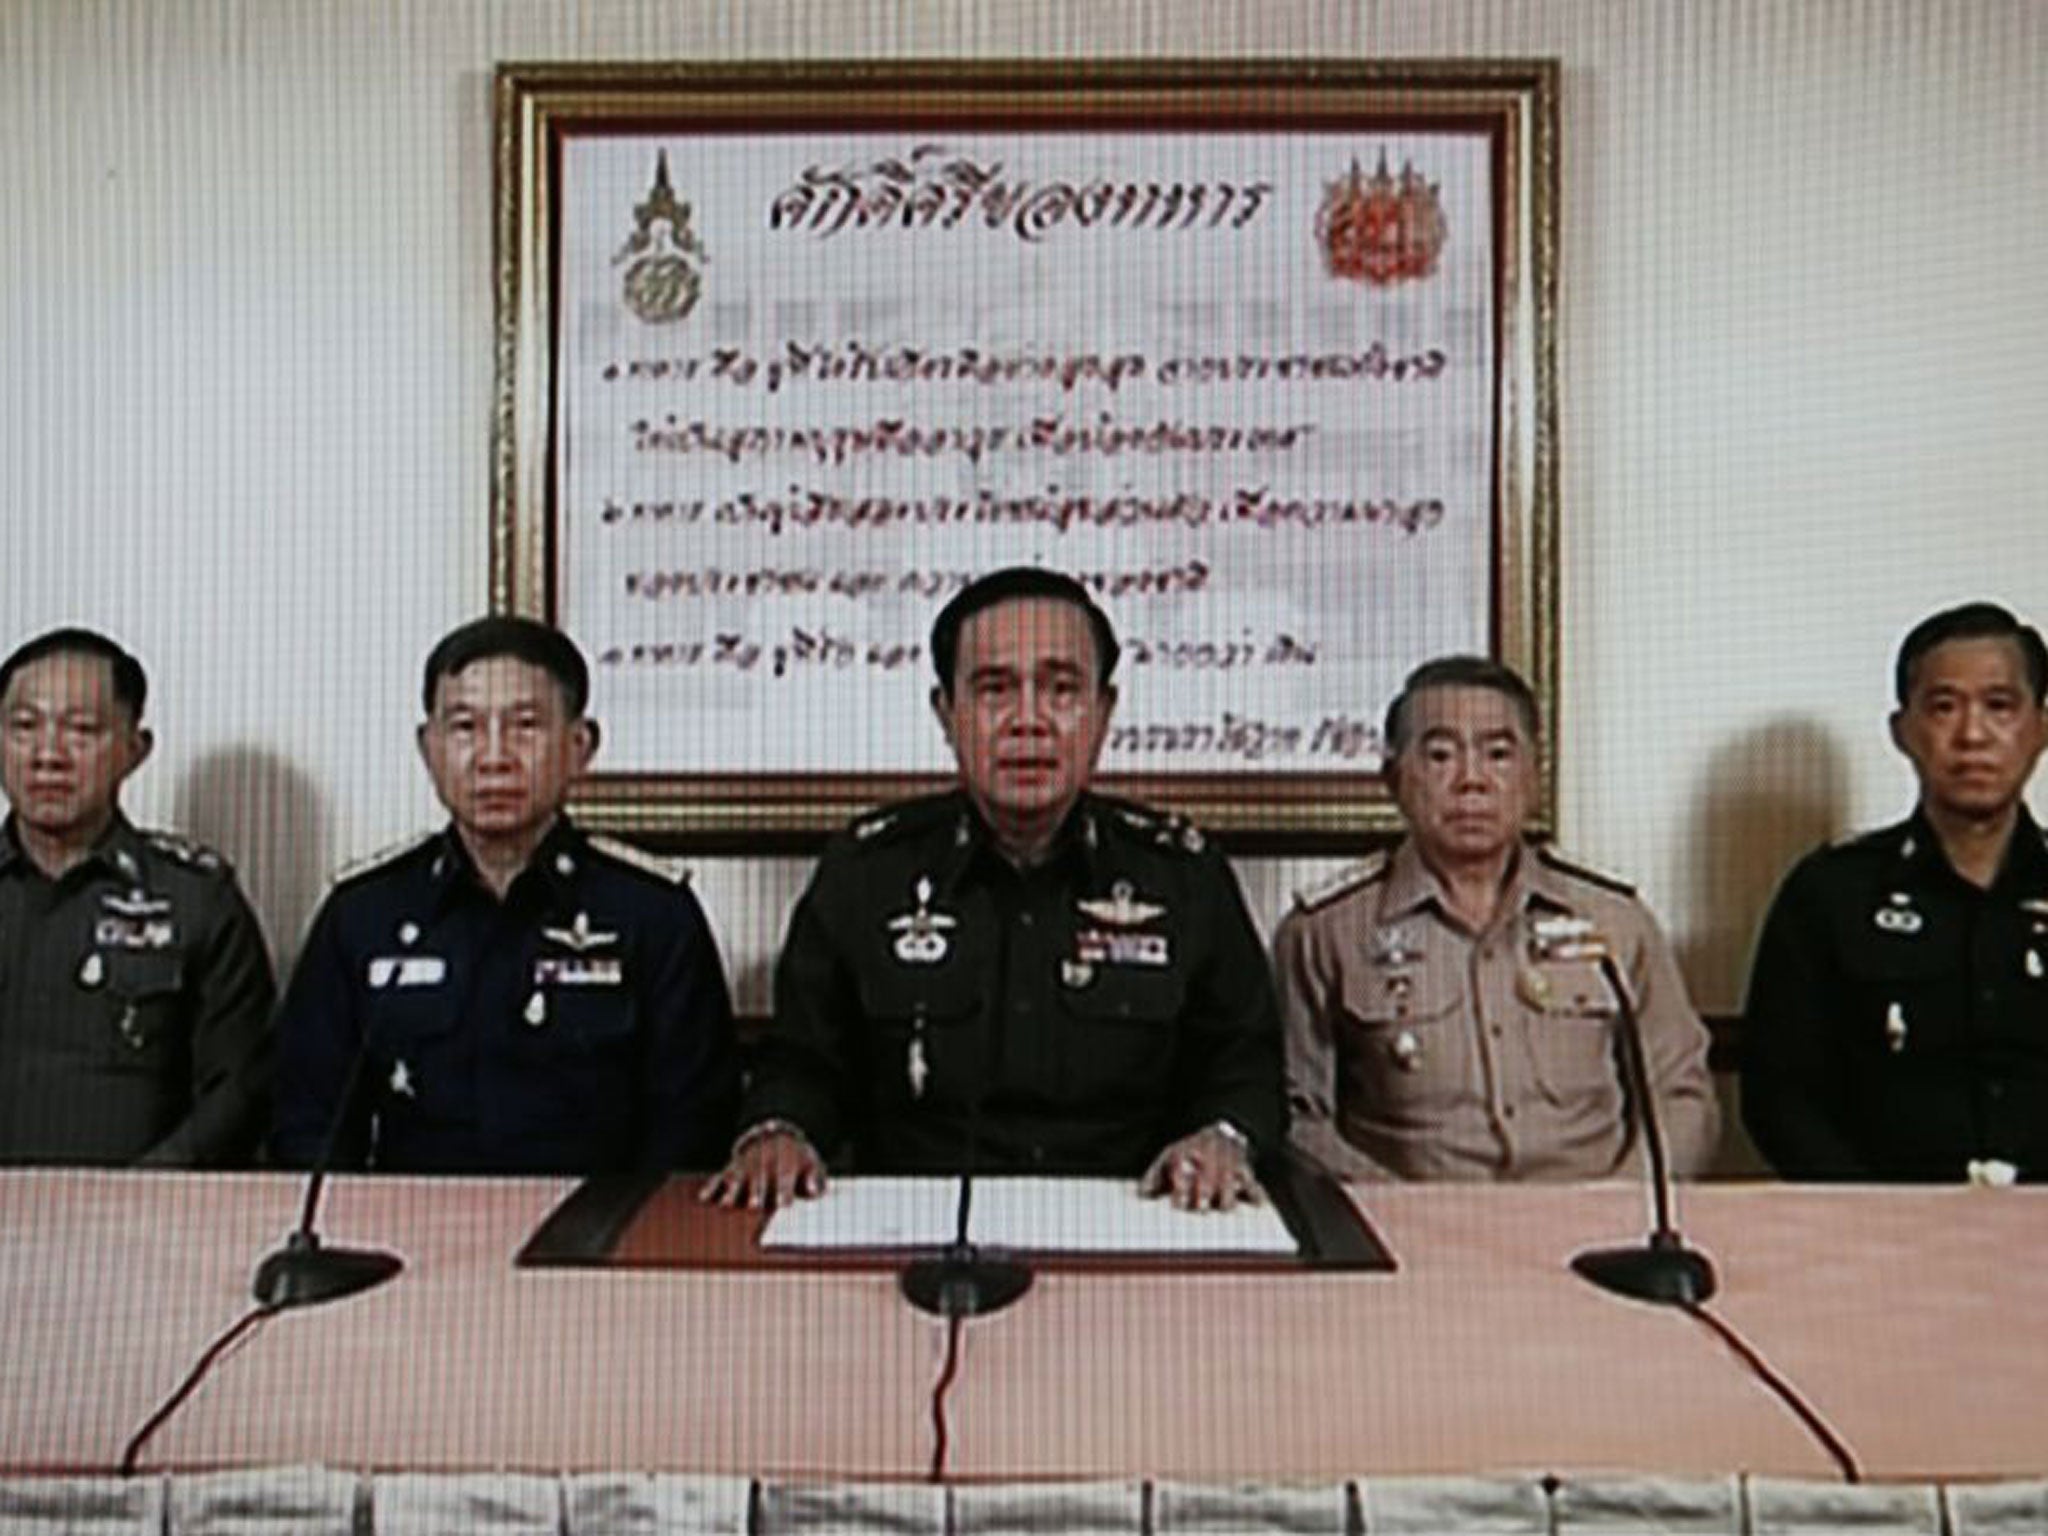 TV grab shows Army Chief General Prayuth Chan-ocha (C) speaking next to Navy Chief Adm Narong Pipattanasai (2-R), Air Chief Marshall Prachin Chantong (2-L), Thai Police Chief Adul Saengsingkaew (L) and identified high rank military officer (R) during a mi